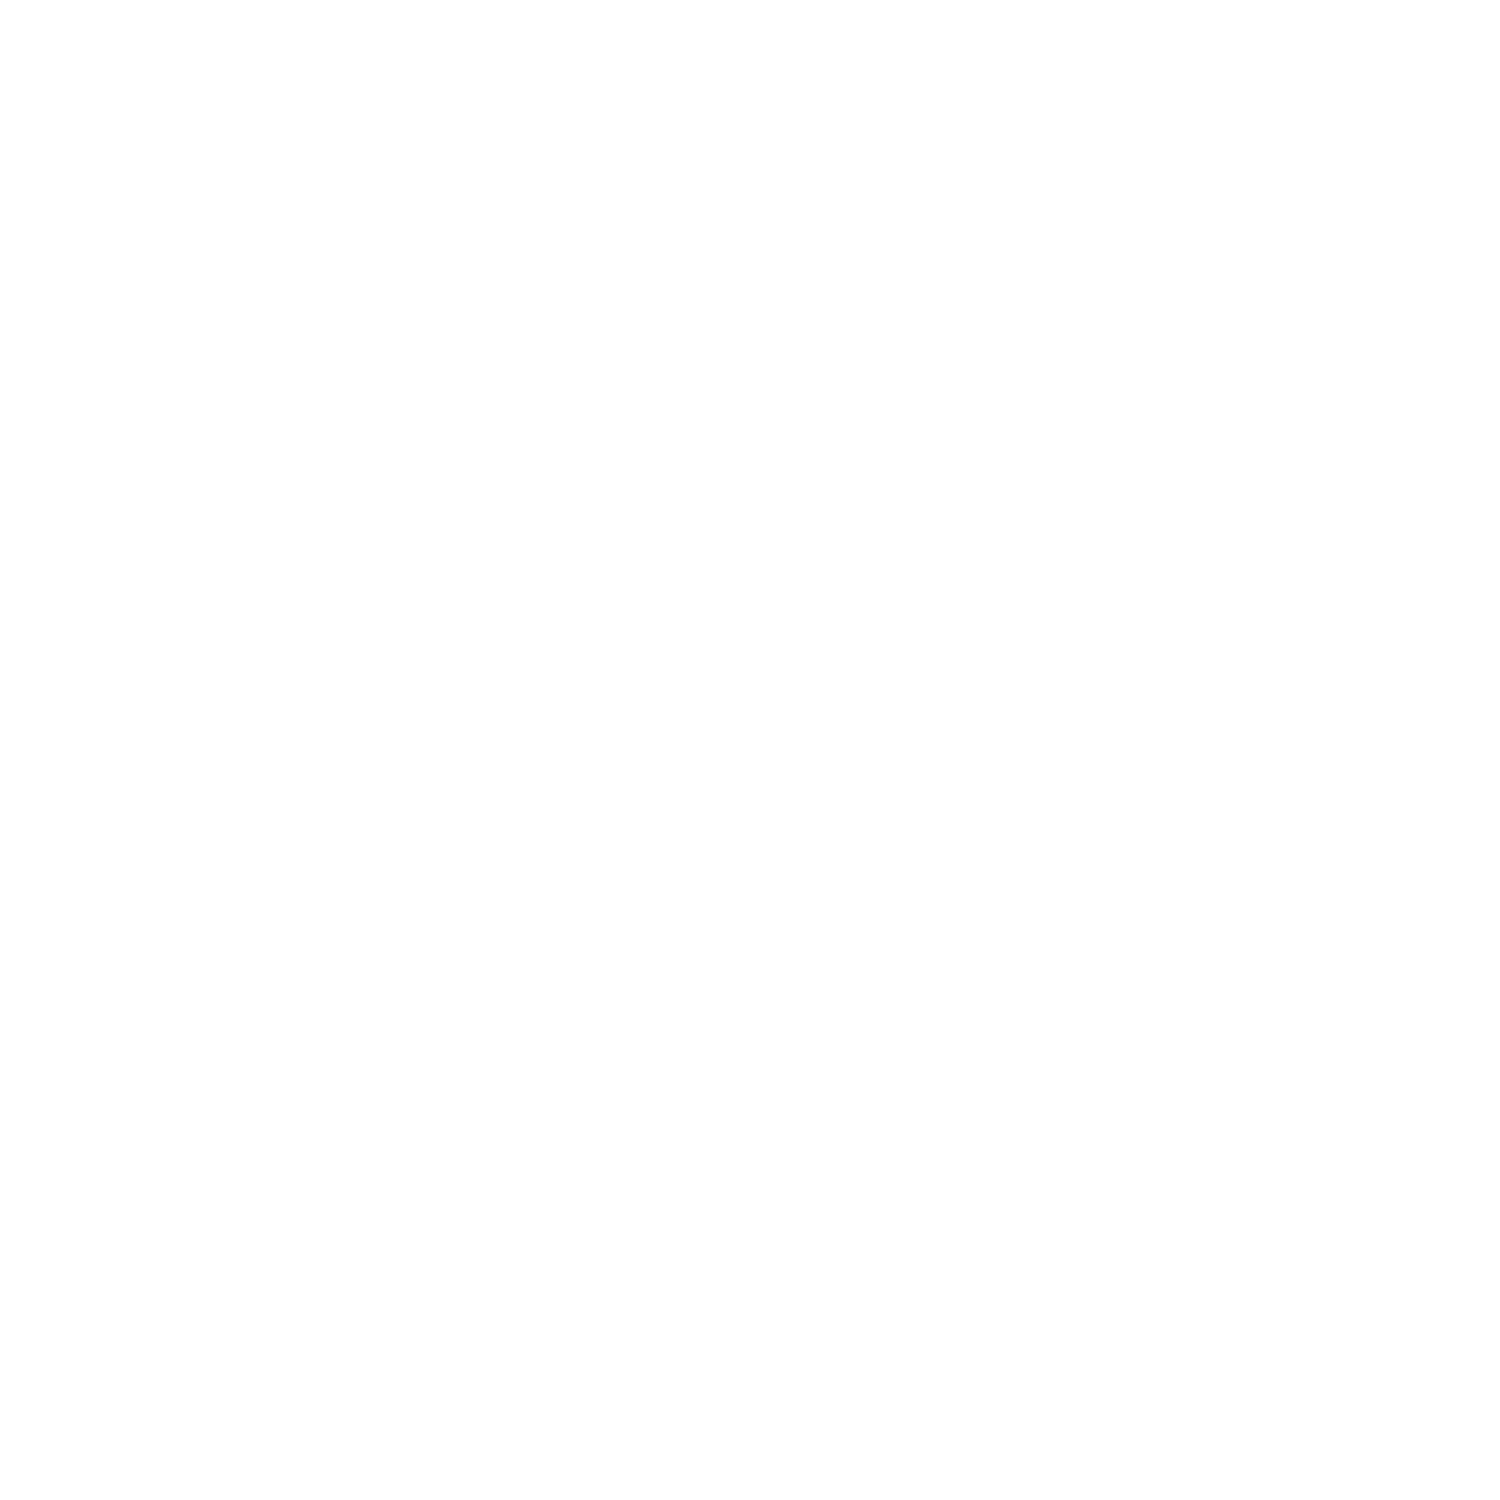 25th Hour Agency